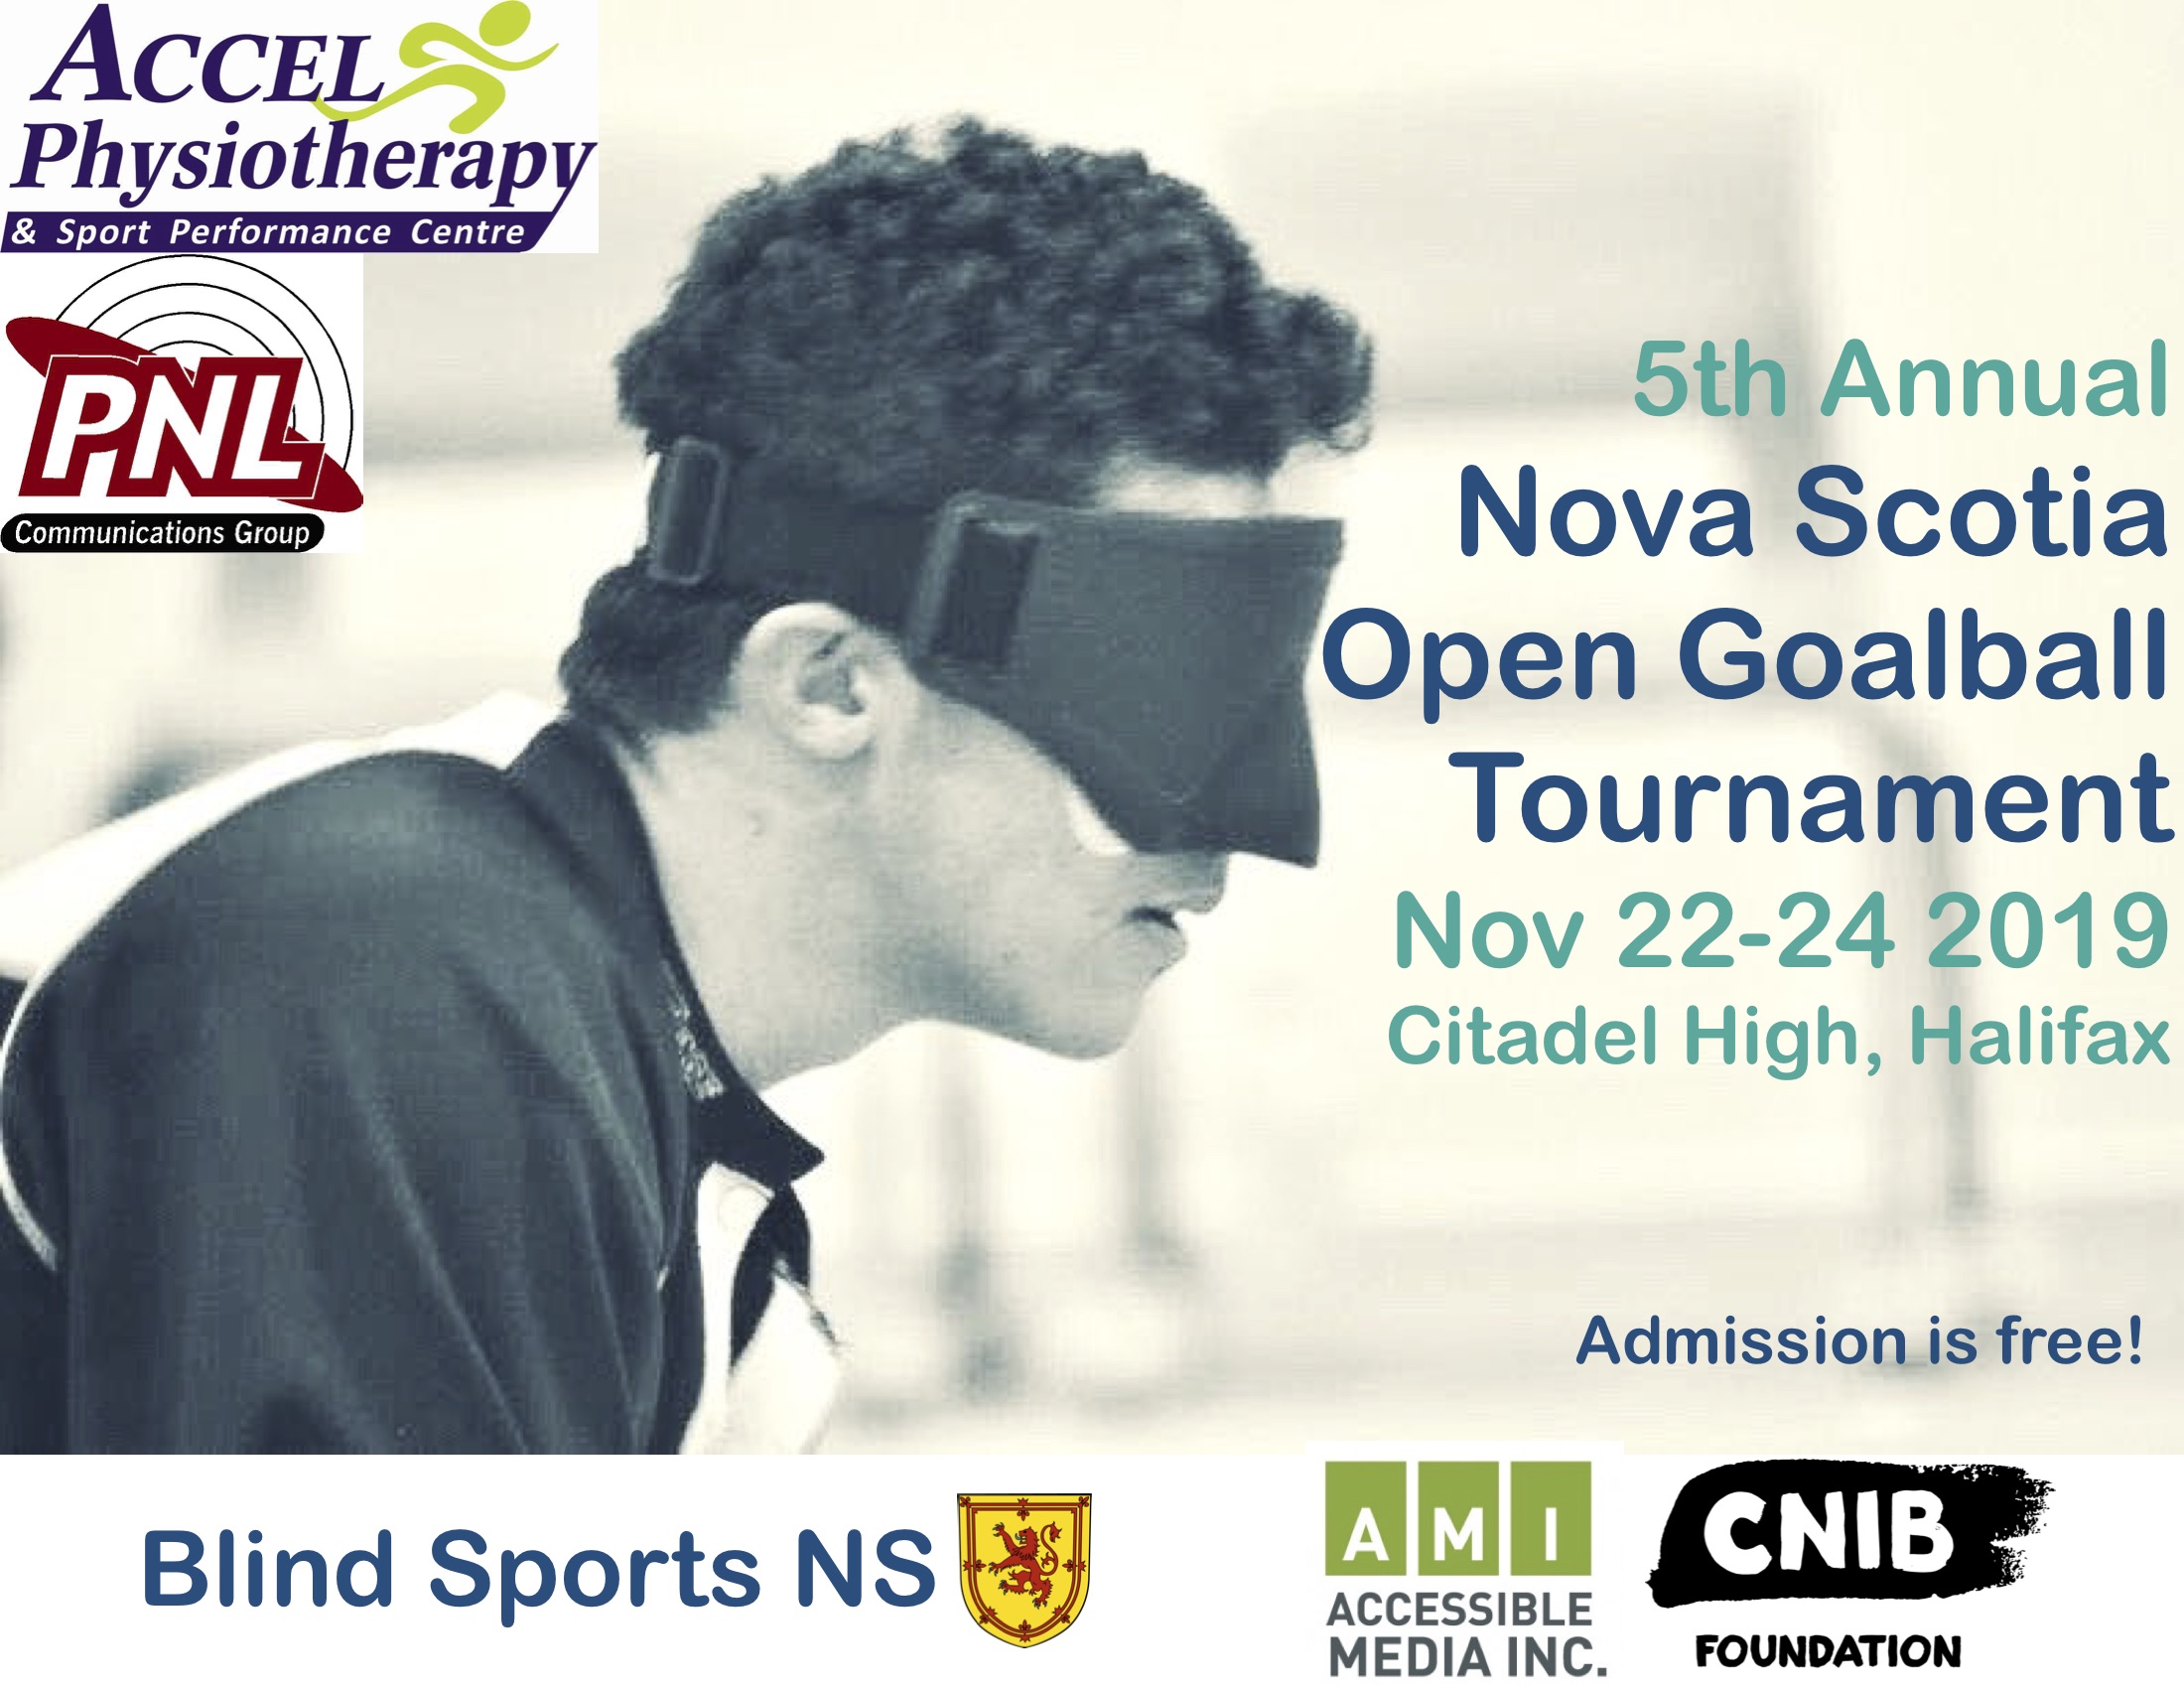 Poster Description: A shoulders up profile photo of a person wearing goalball eyeshades in deep focus. 5th Annual Nova Scotia Open Goalball Tournament Nov 22-24 2019 Citadel High, Halifax Admission is Free! Blind Sports NS and provincial coat of arms lion in yellow. Featured Sponsors logos include: Accel Physiotherapy & Sport Performance Centre; PNL Communications Group; Accessible Media Inc; CNIB Foundation.  